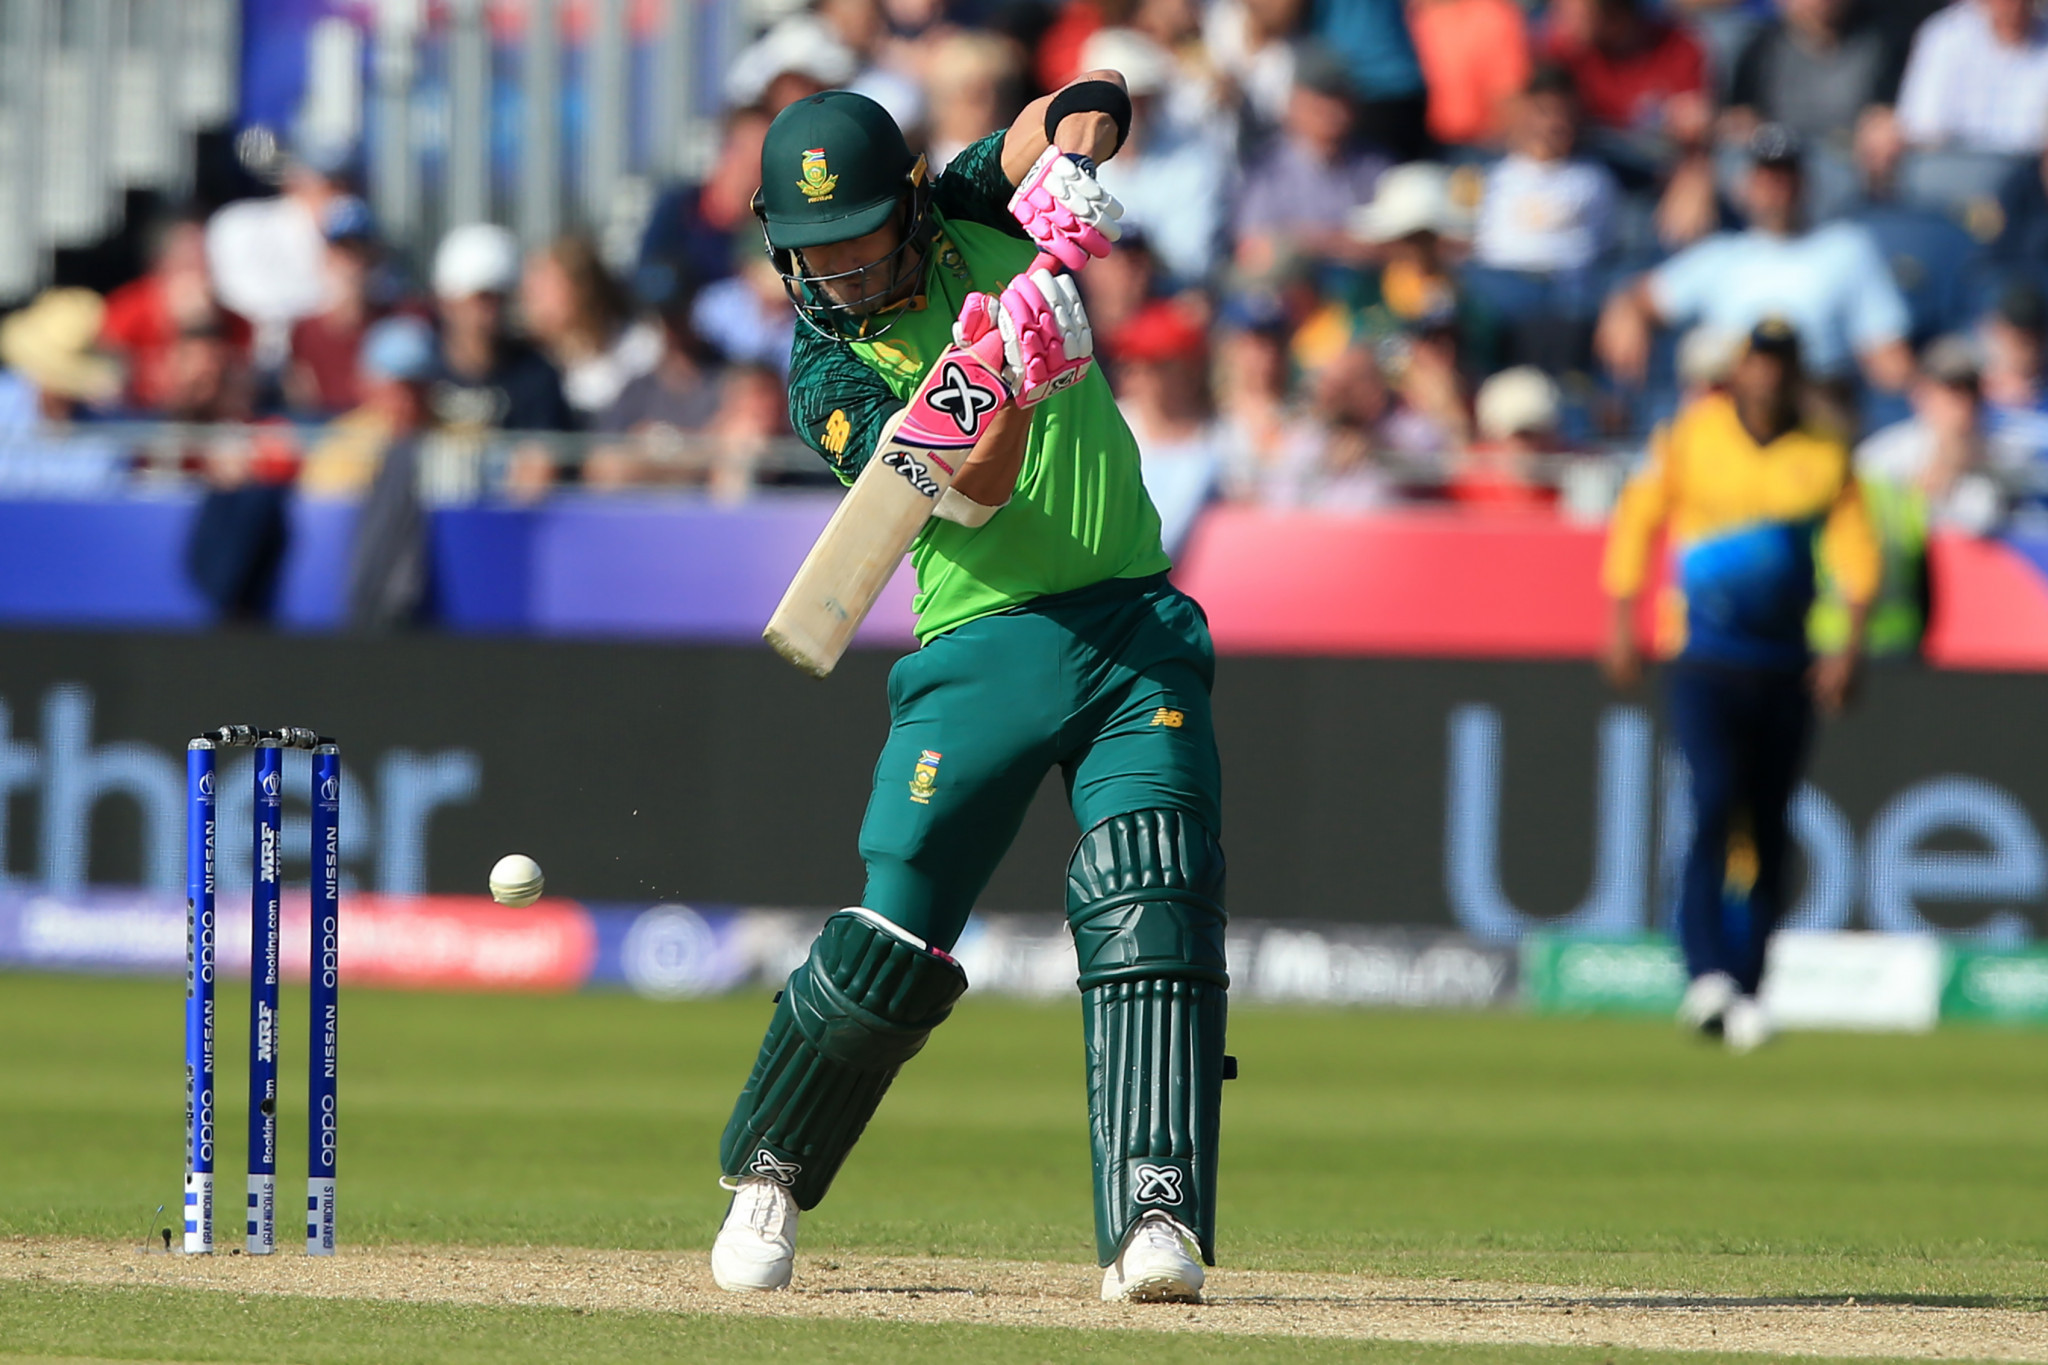 Faf du Plessis hit an unbeaten 96 in a comprehensive win for South Africa ©Getty Images